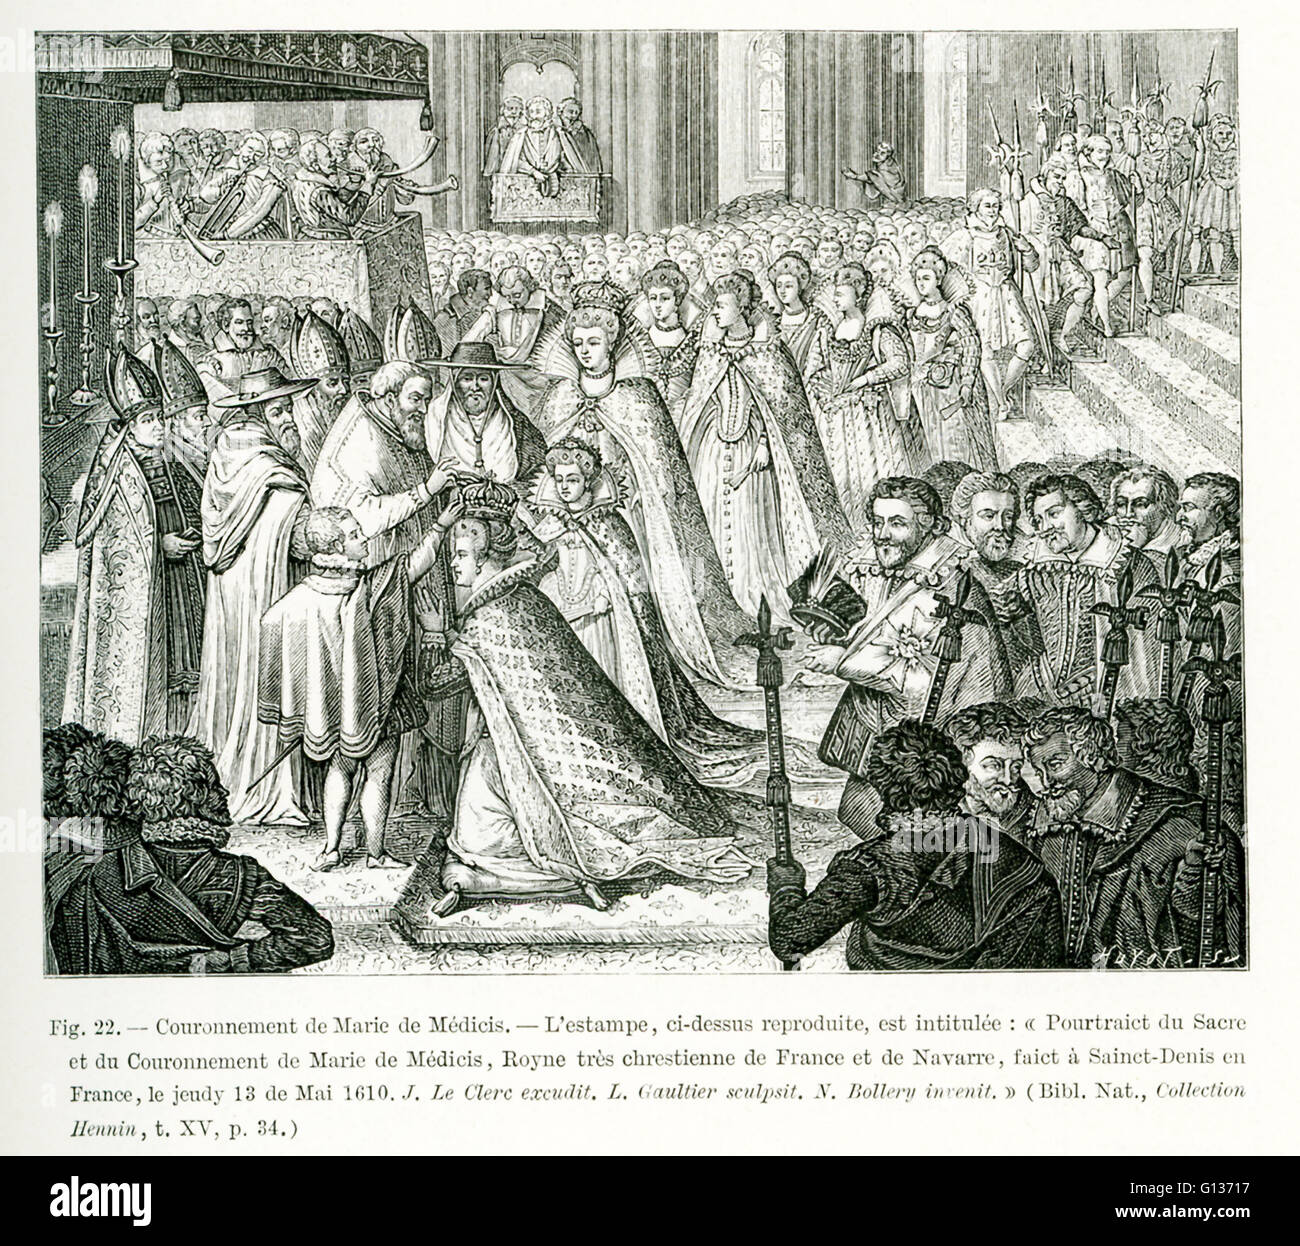 The caption for this engraving translates from French: Coronation of Marie de Medicis. The print, as shown here, is entitled: Portrait of the Holy Coronation of Marie de Medicis, the very Christian ruler of France and Navarre, at the Cathedral of Saint Denis in France, on Thursday, May 13, 1610. J. Clerc executed this; L. Gaultier sculpted it; and N. Bollery devised it. Stock Photo